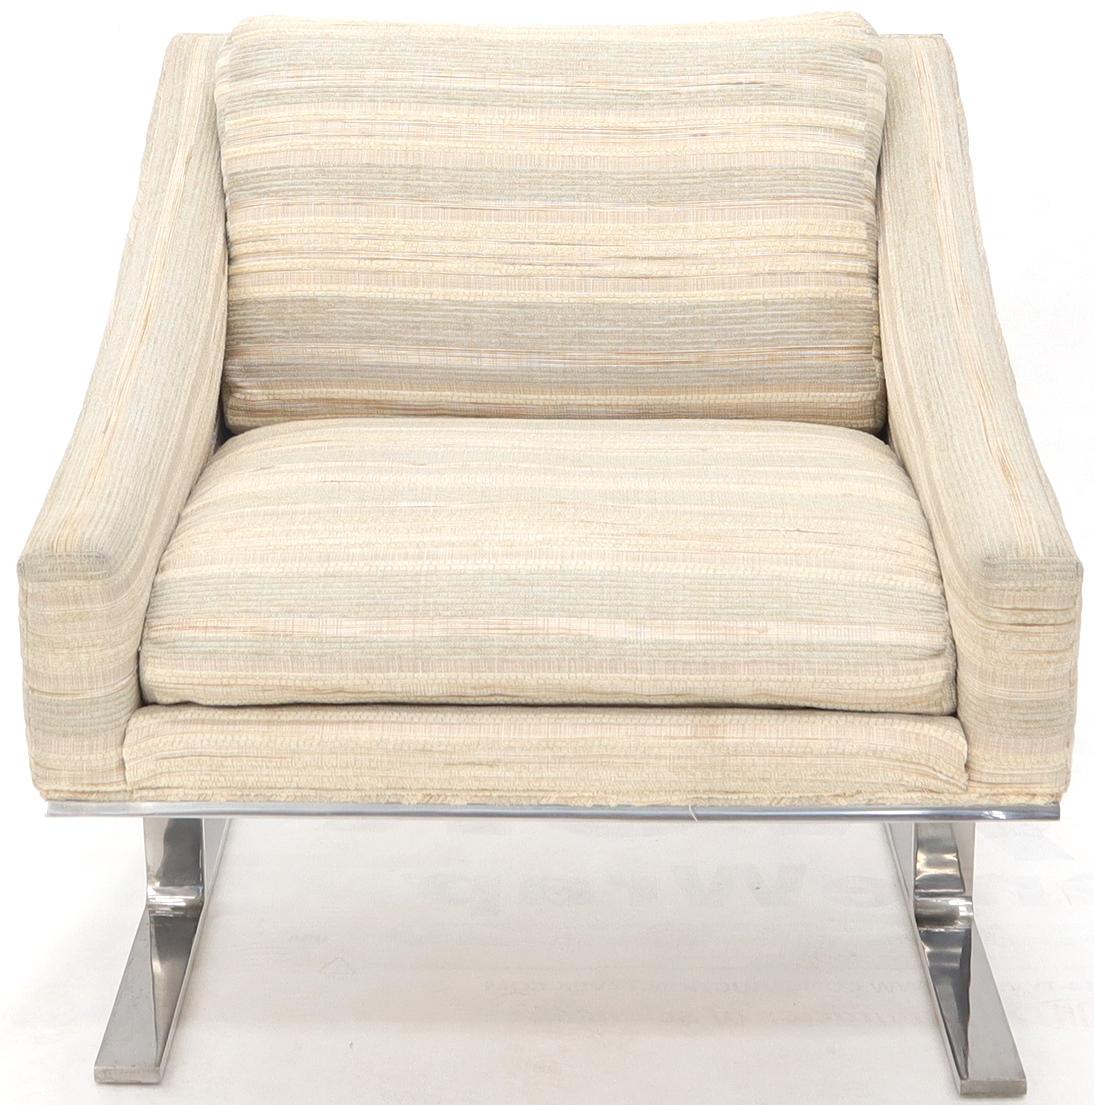 Mid-Century Modern heavy polished stainless steel frame scoop chair by Kipp Stewart for Directional. 